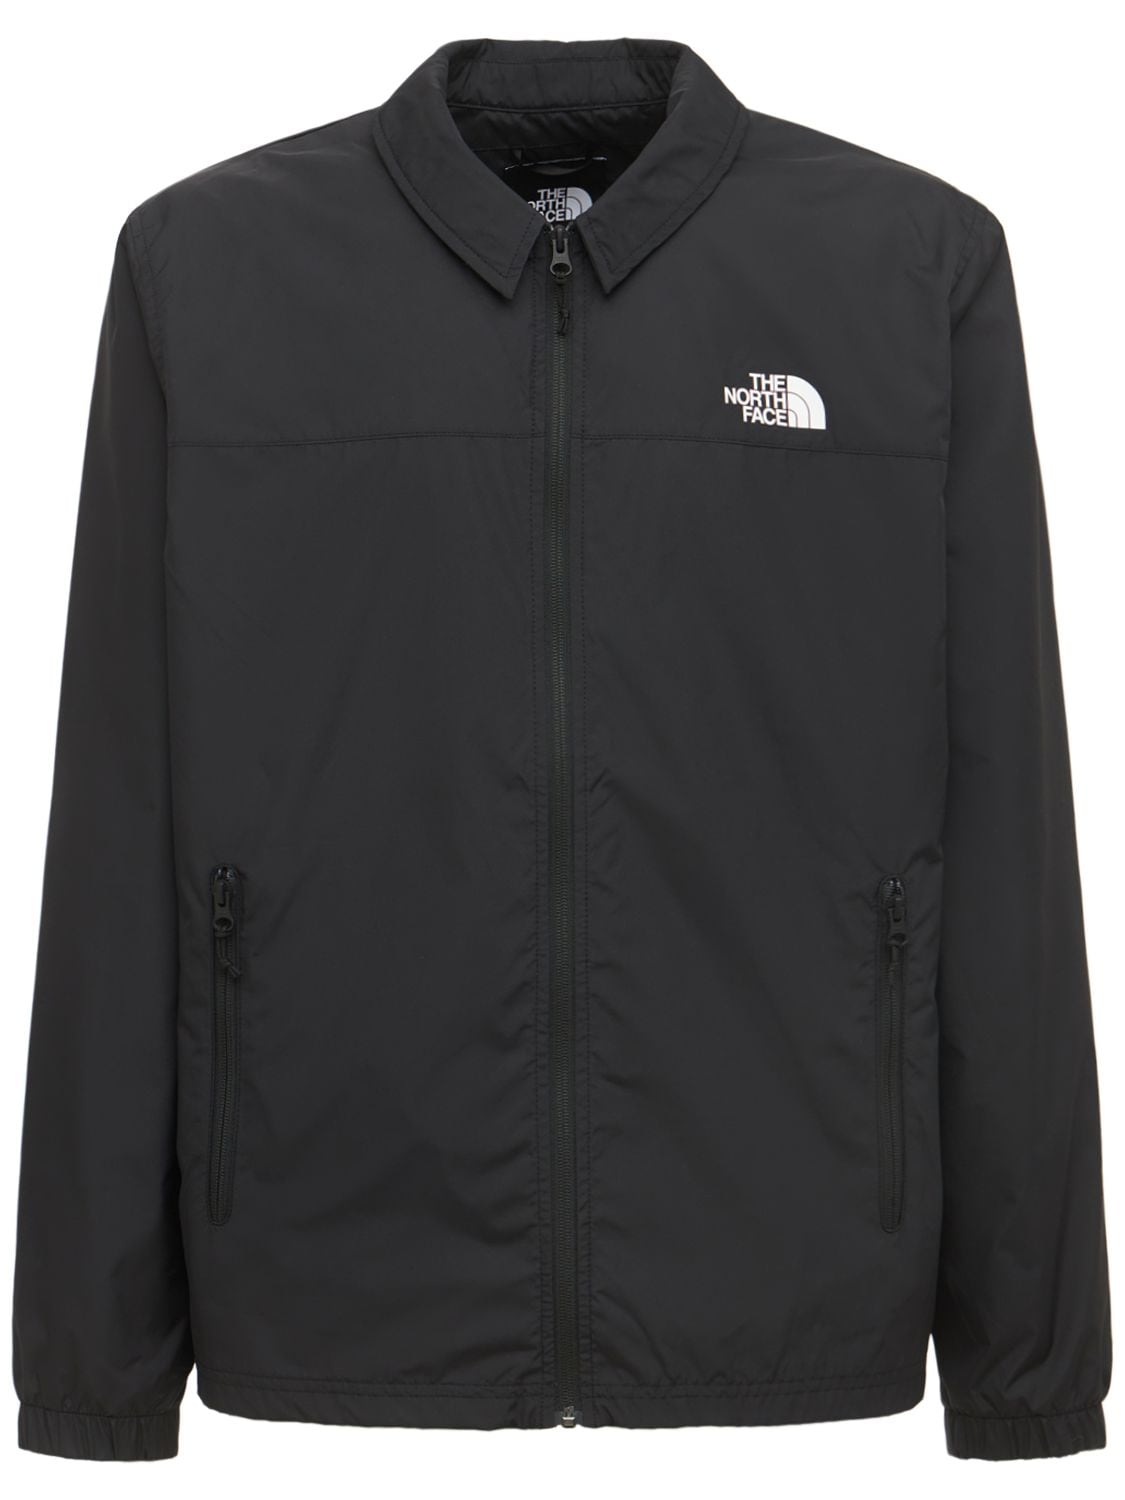 The North Face Cyclone Coach Jacket In Black